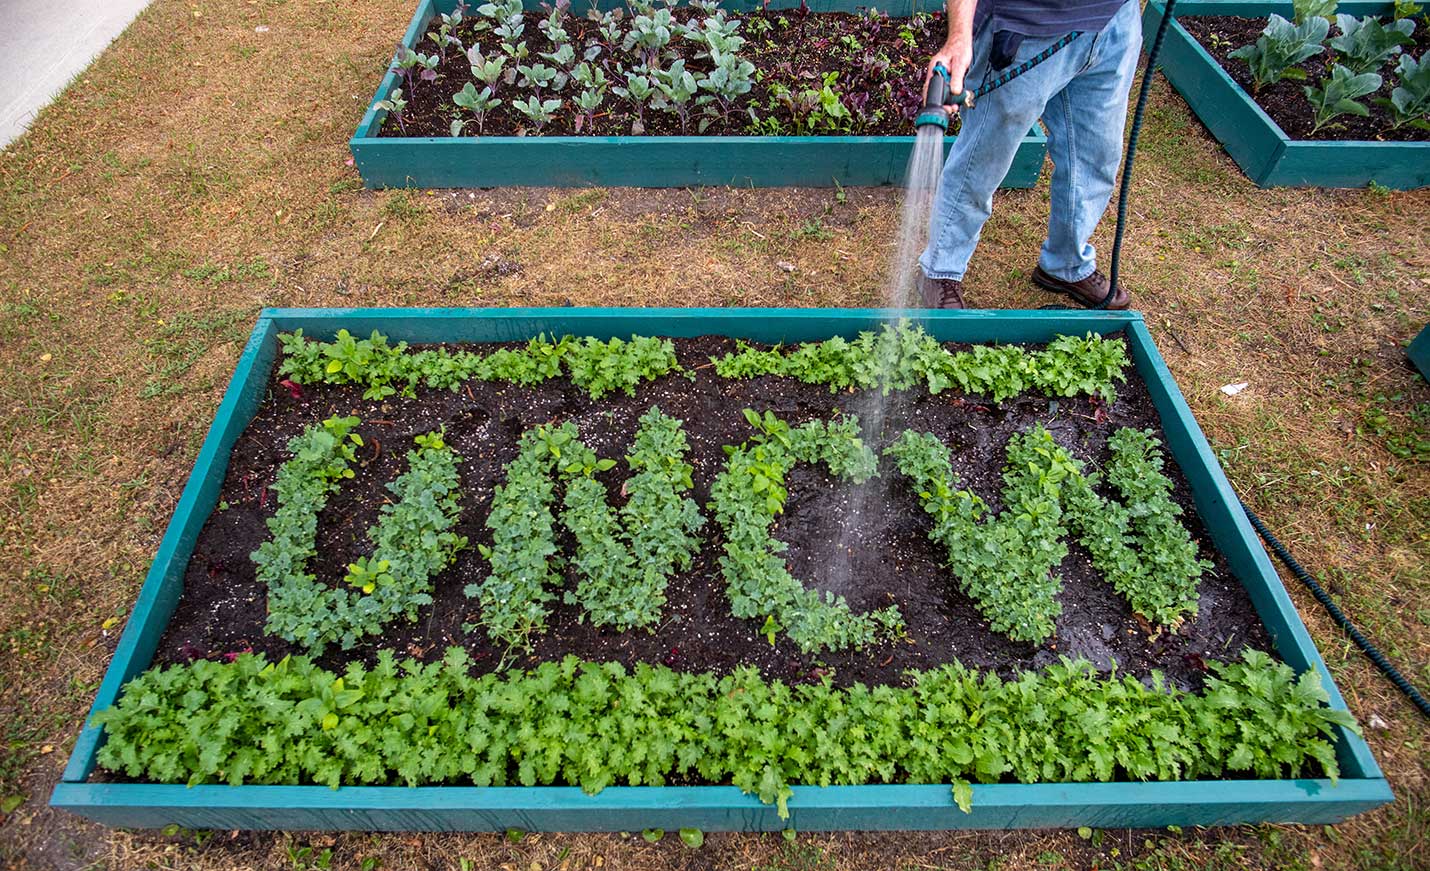 Someone watering a raised garden bed where some of the plants spell out UNCW